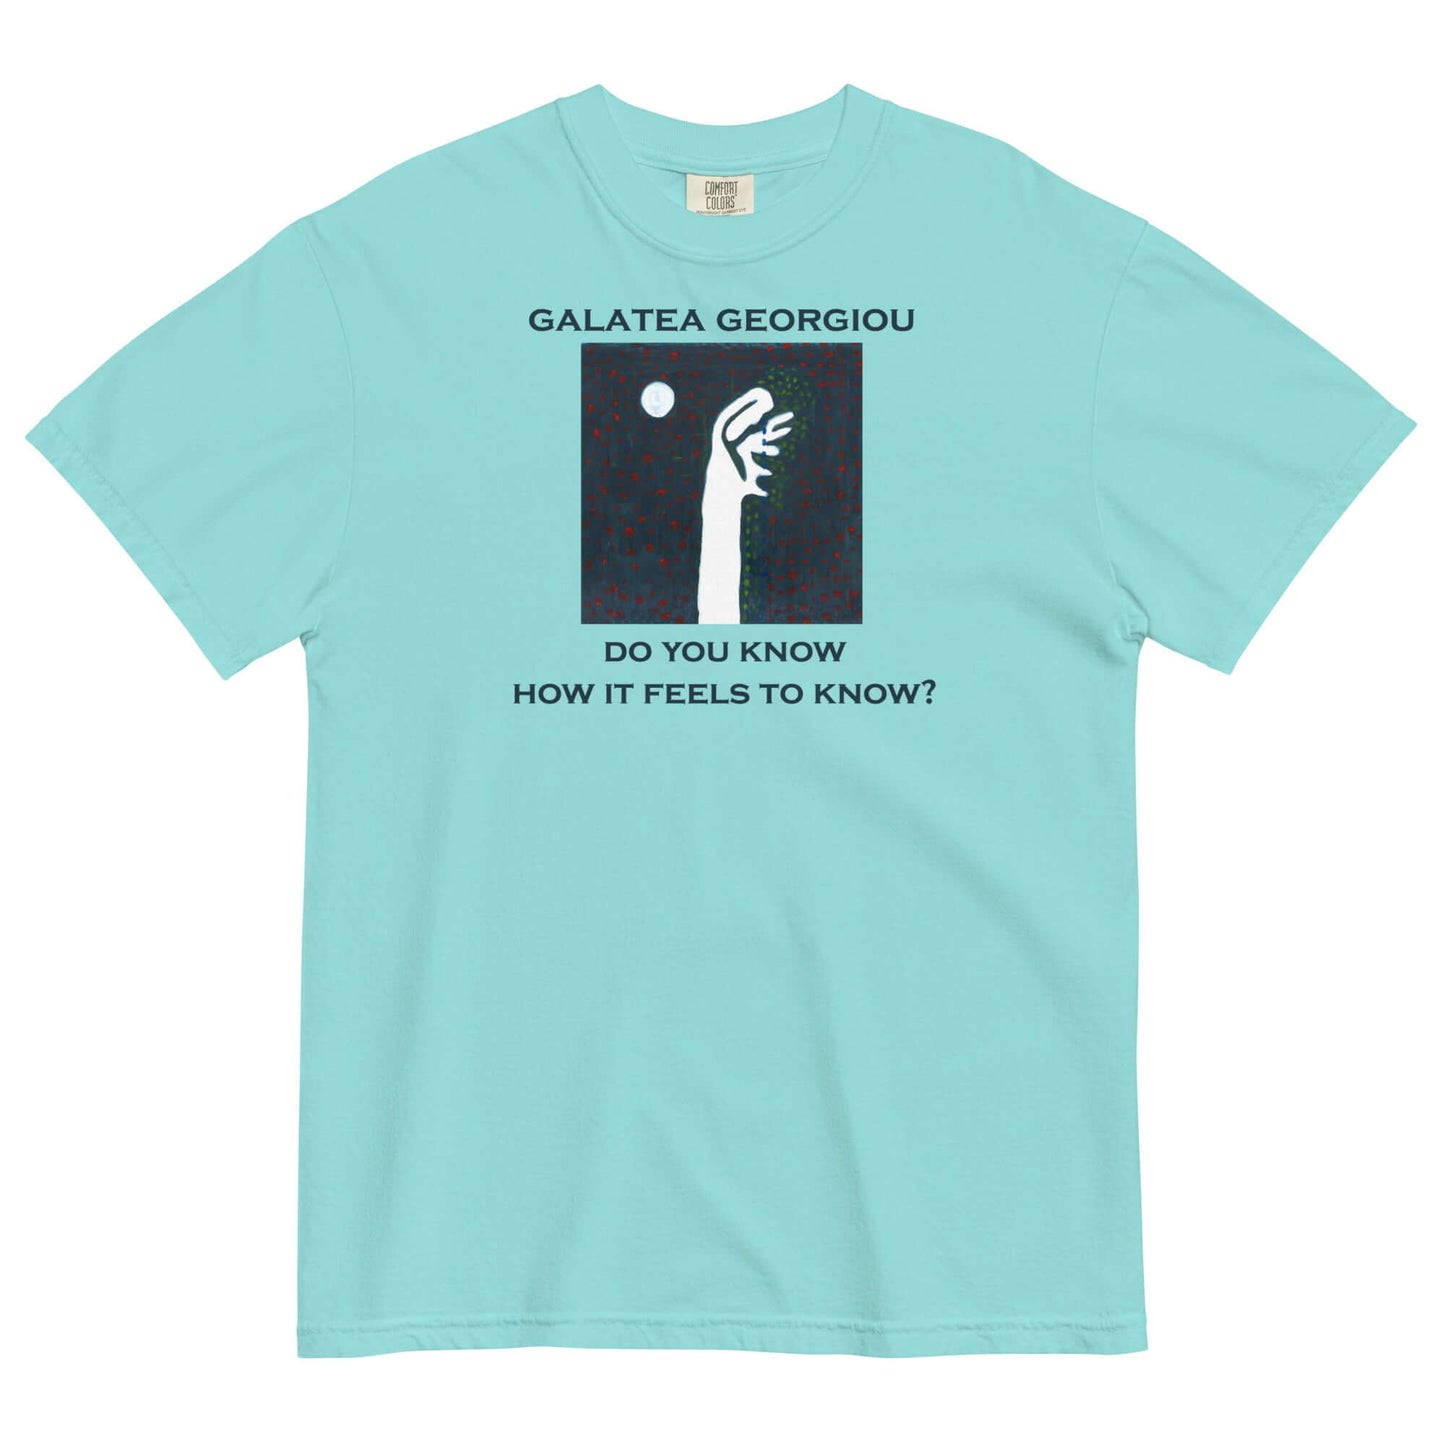 How it Feels to Know - Unisex garment-dyed heavyweight t-shirt